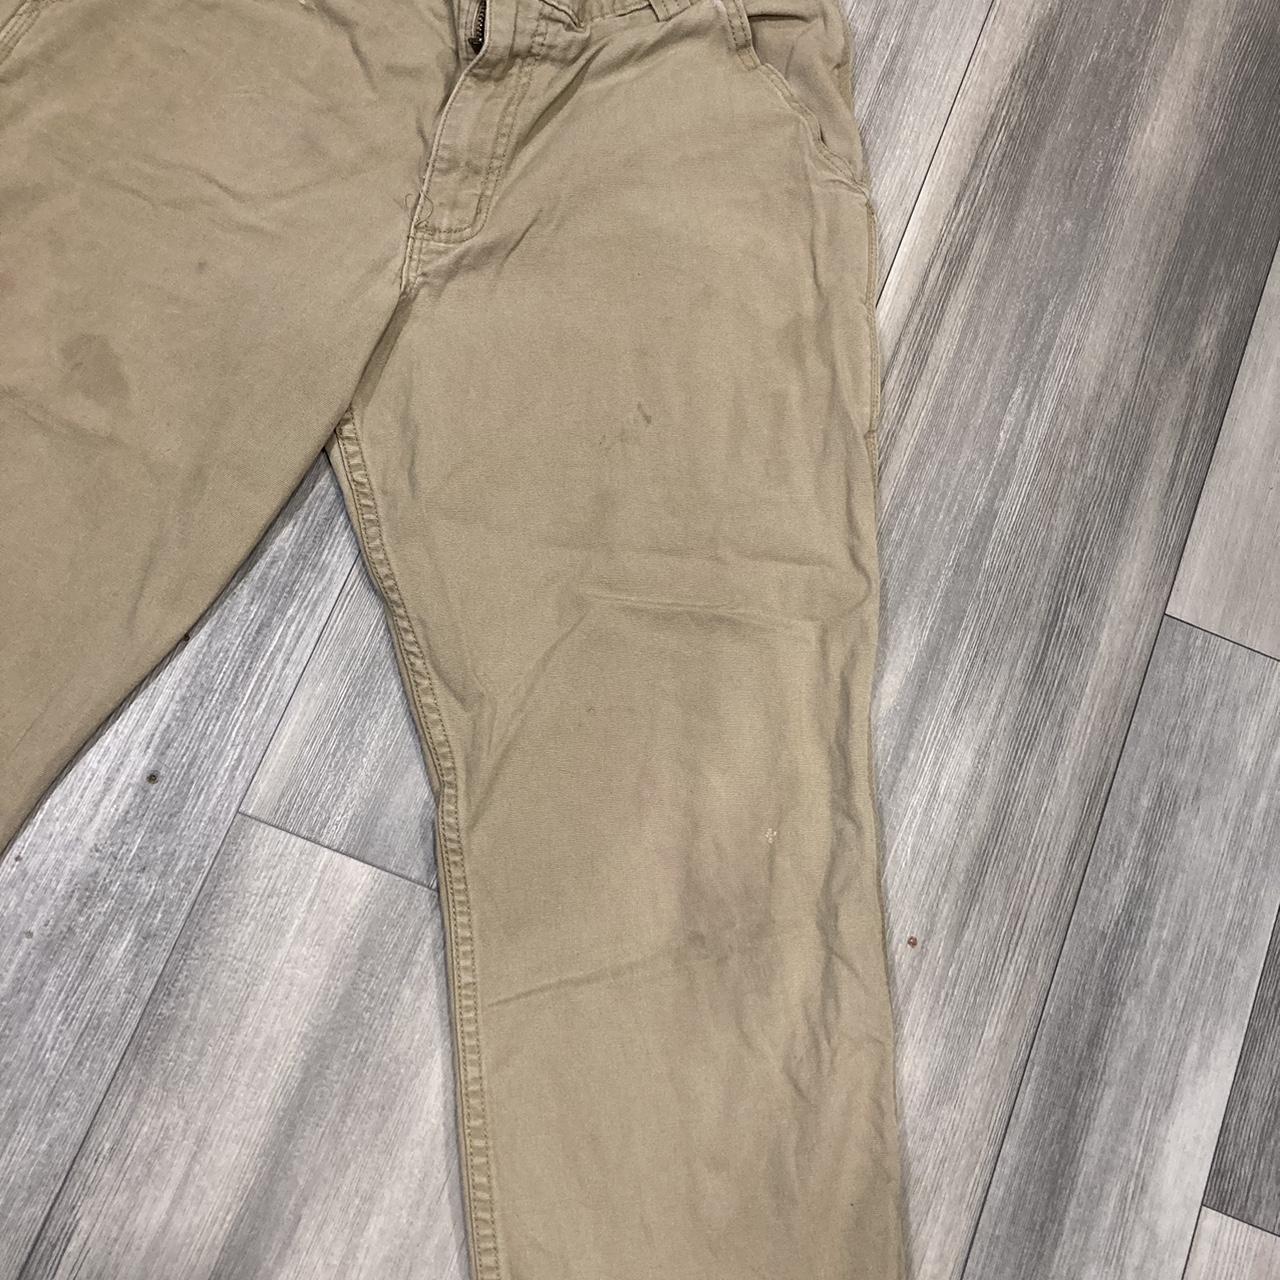 Carrhart pants (some stains) 34 30 - Depop